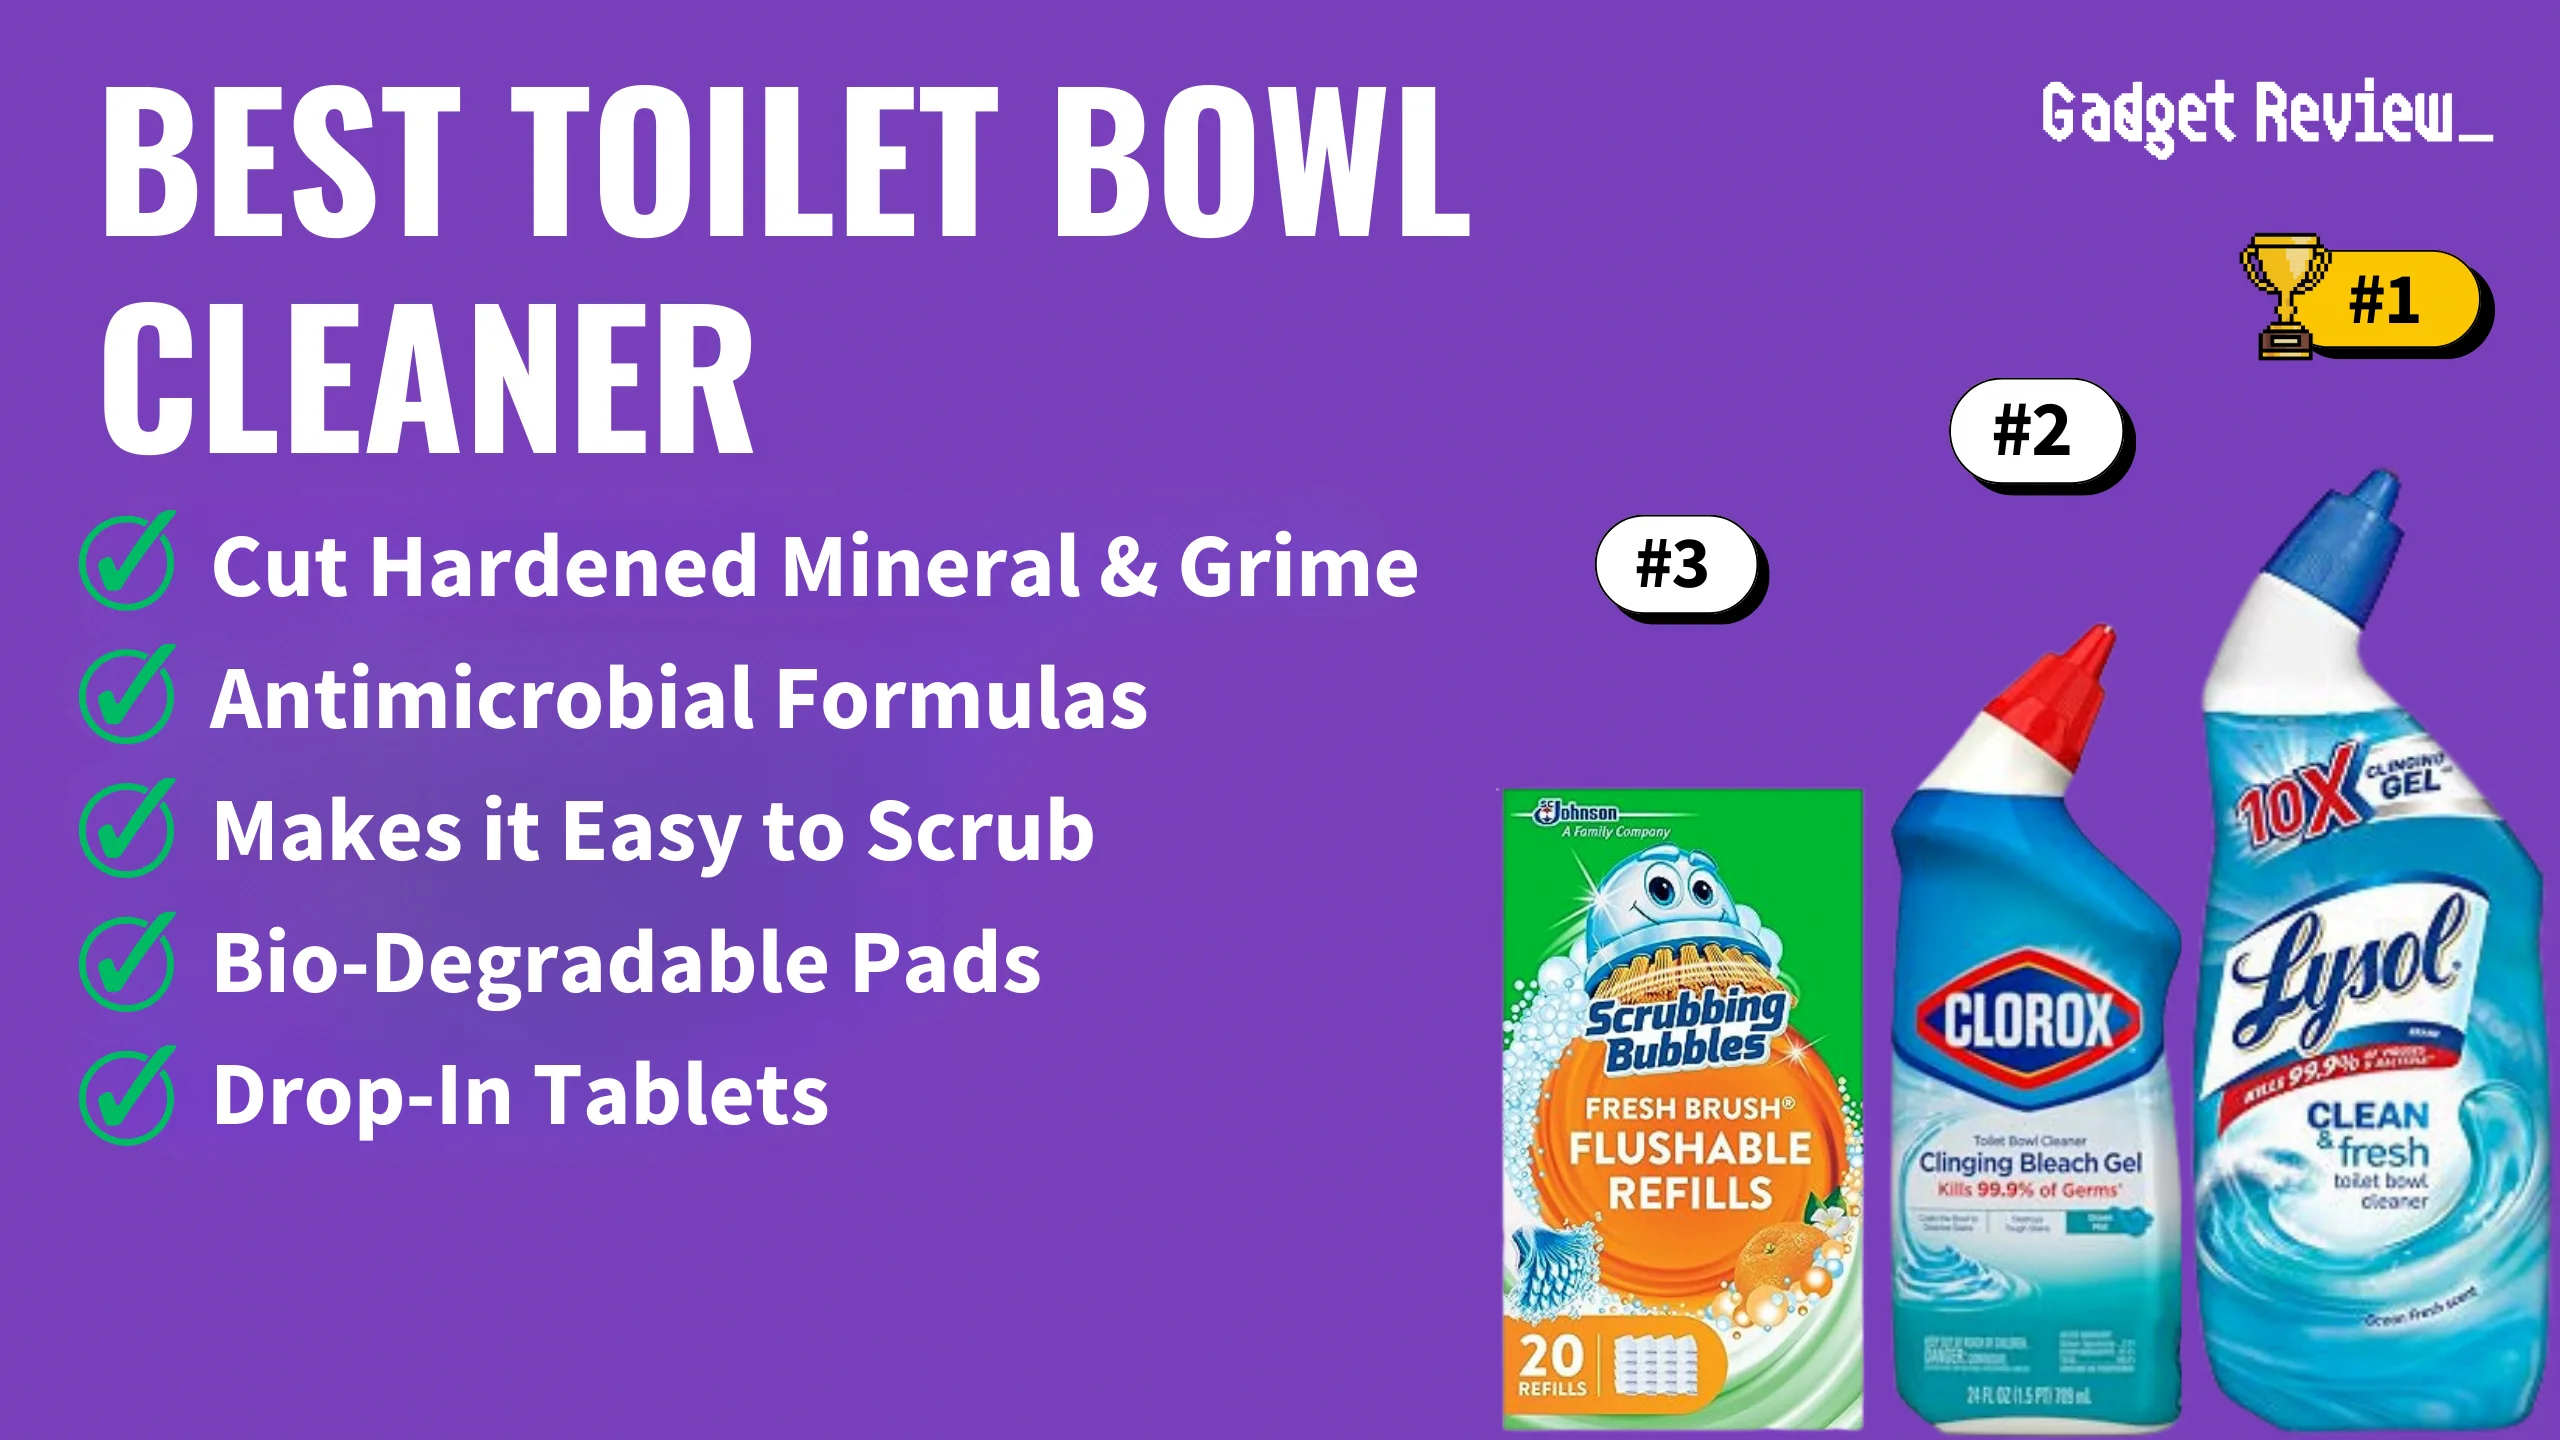 best toilet bowl cleaner featured image that shows the top three best bathroom essential models